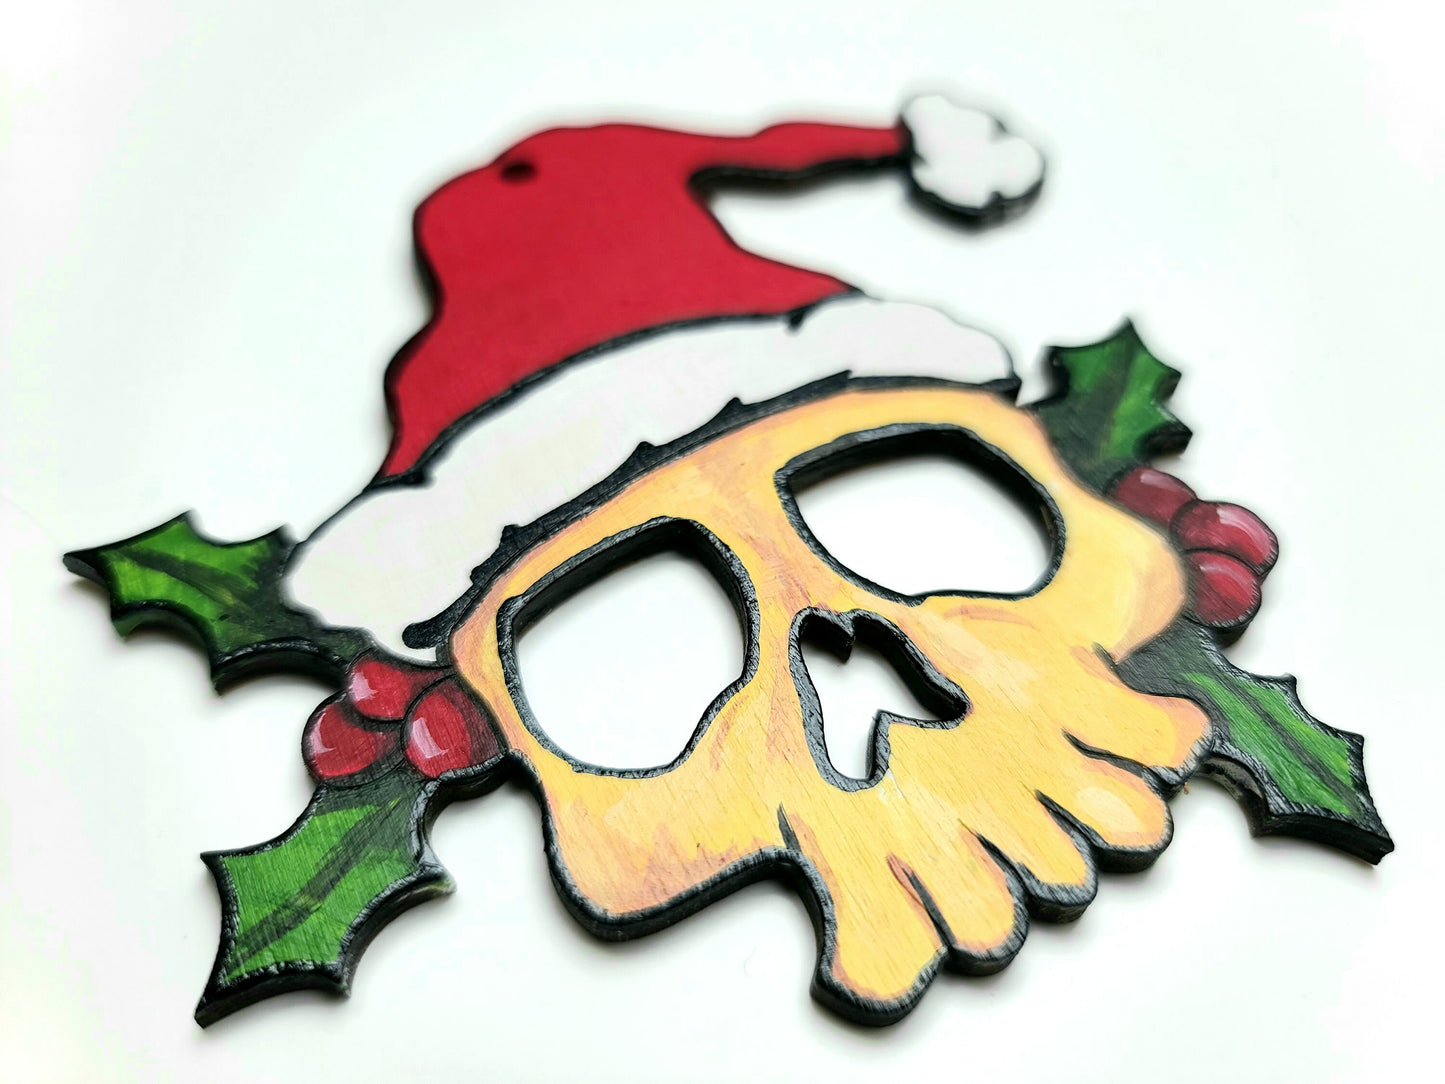 Holly Skull With Santa Hat-Hand Painted Wood Ornament-Dark Holiday Decor-Gothic Christmas-Painted Skull Ornament-Gothic Tree Decor-Skulls